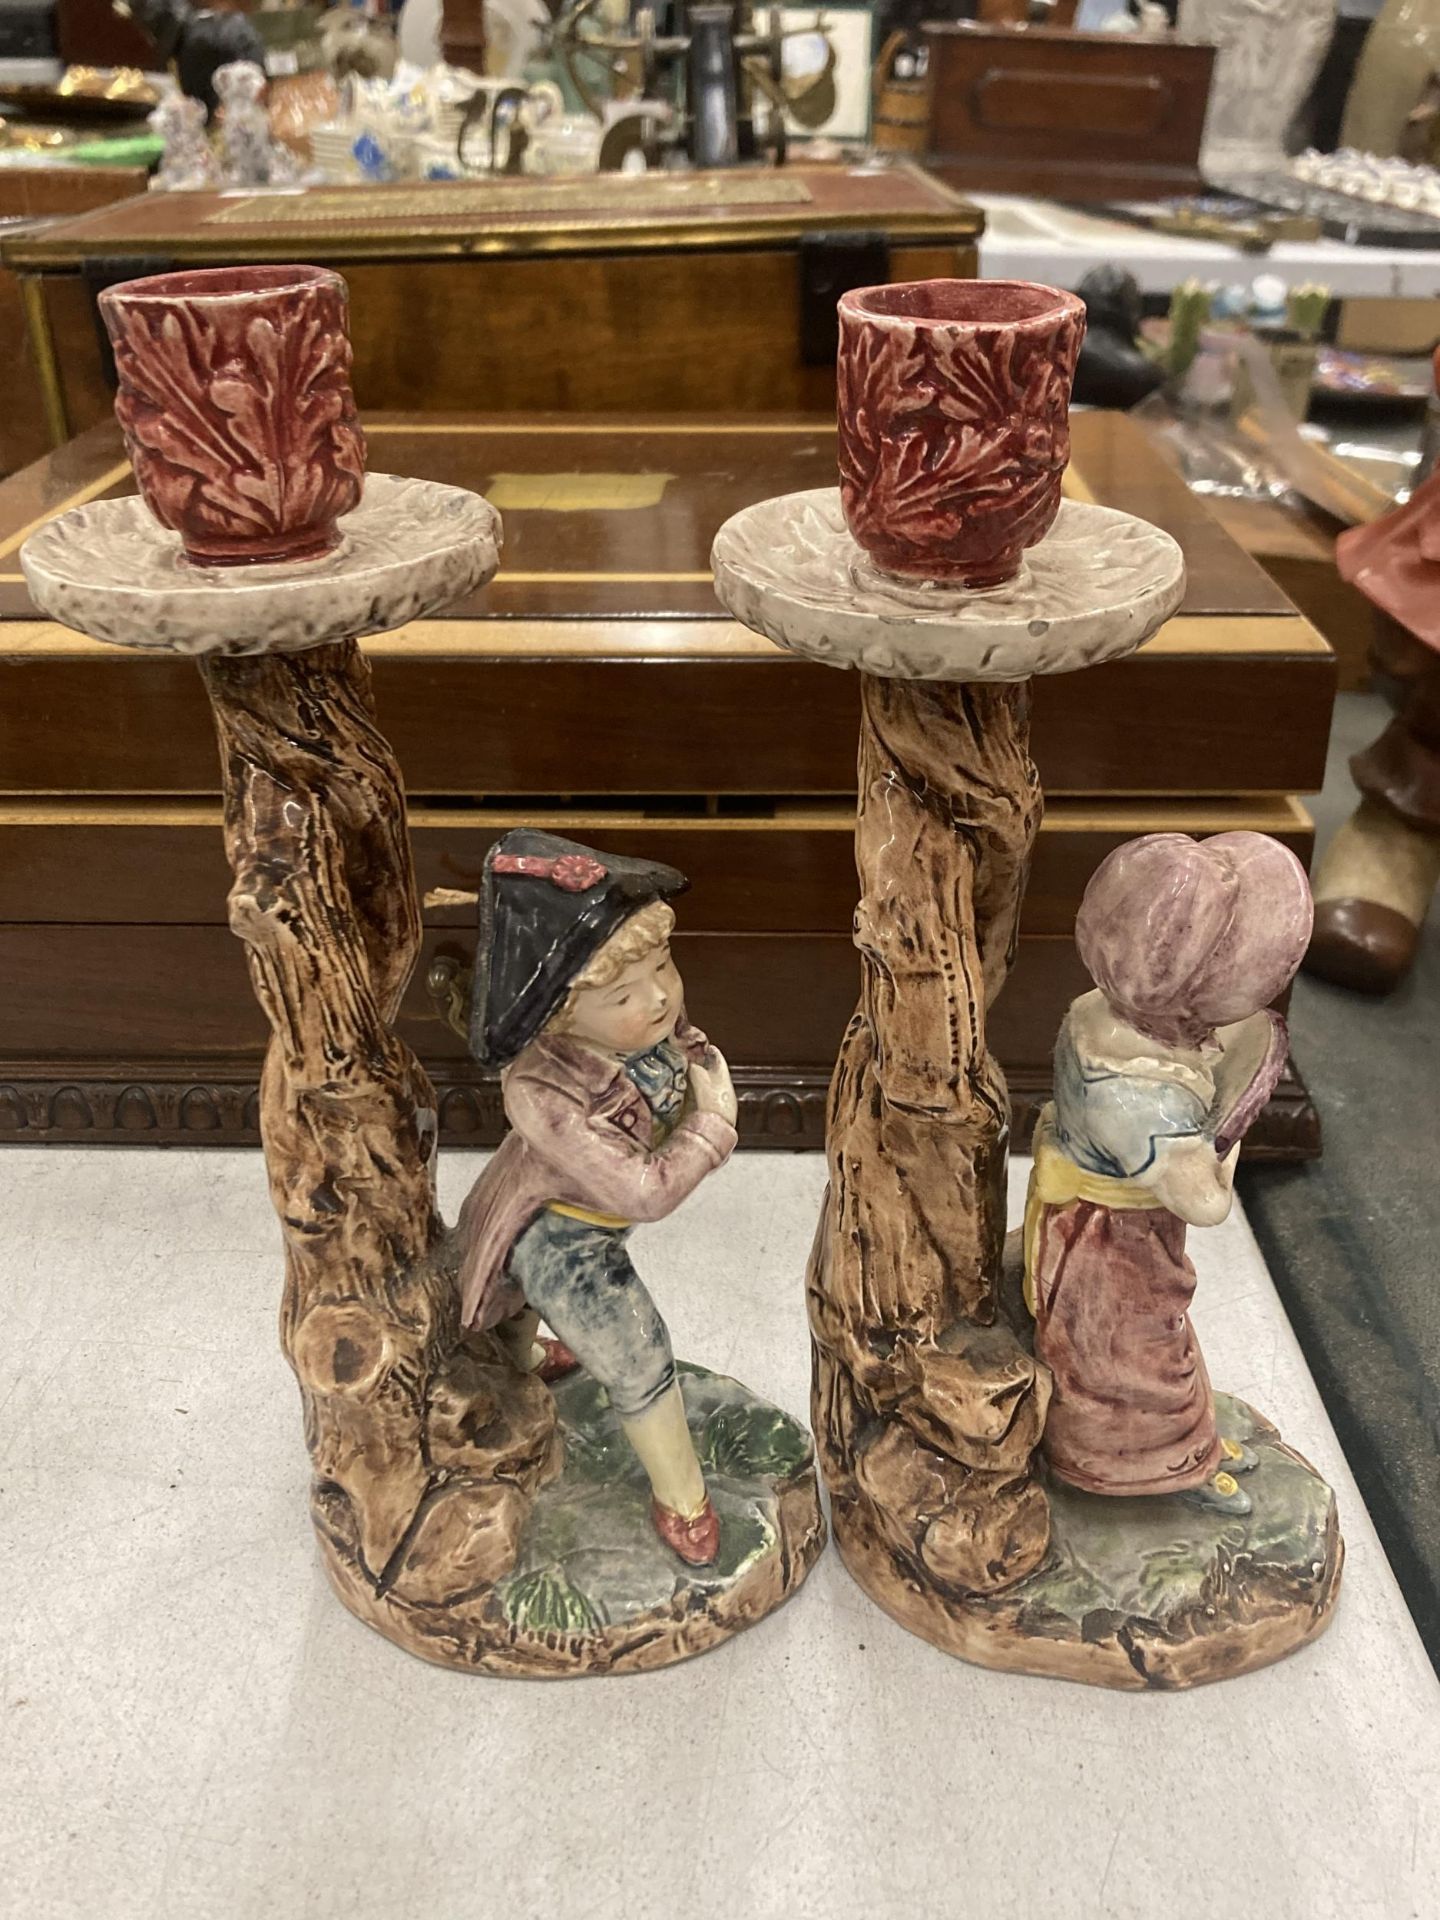 A PAIR OF CERAMIC CANDLE HOLDERS DEPICTING A BOY AND A GIRL - Image 2 of 3